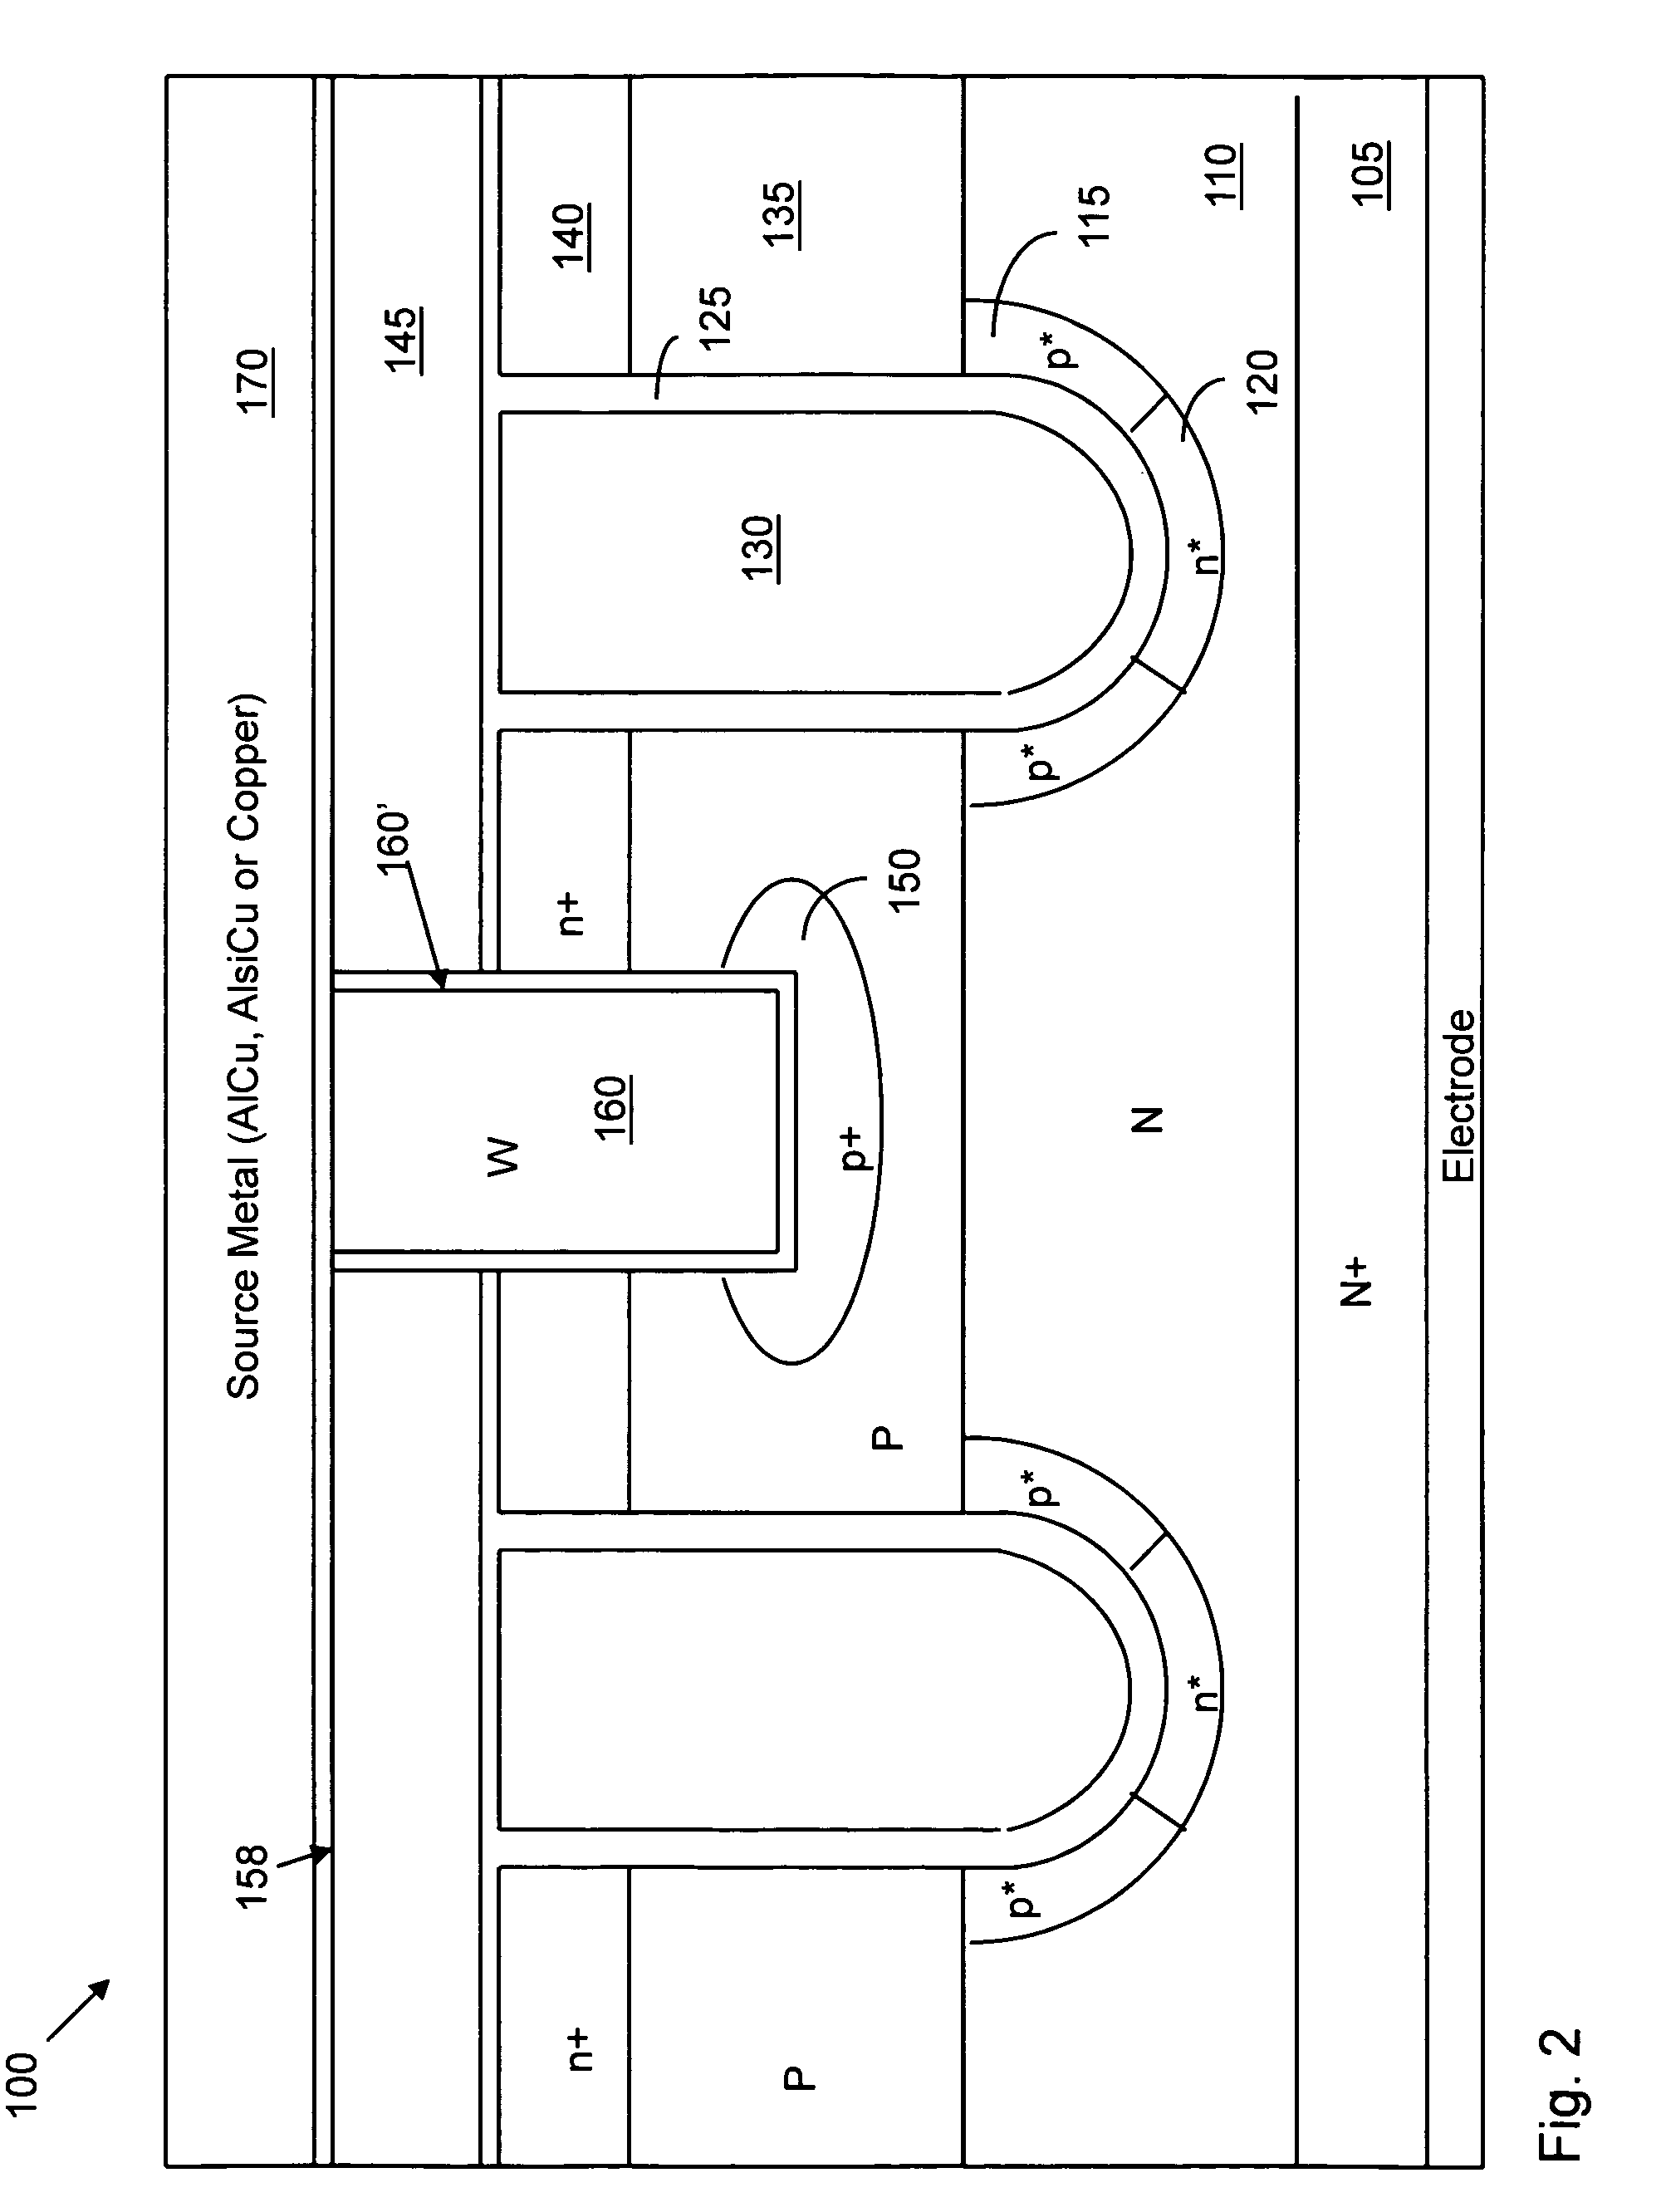 Trench metal oxide semiconductor field effect transistor (MOSFET) with low gate to drain coupled charges (Qgd) structures